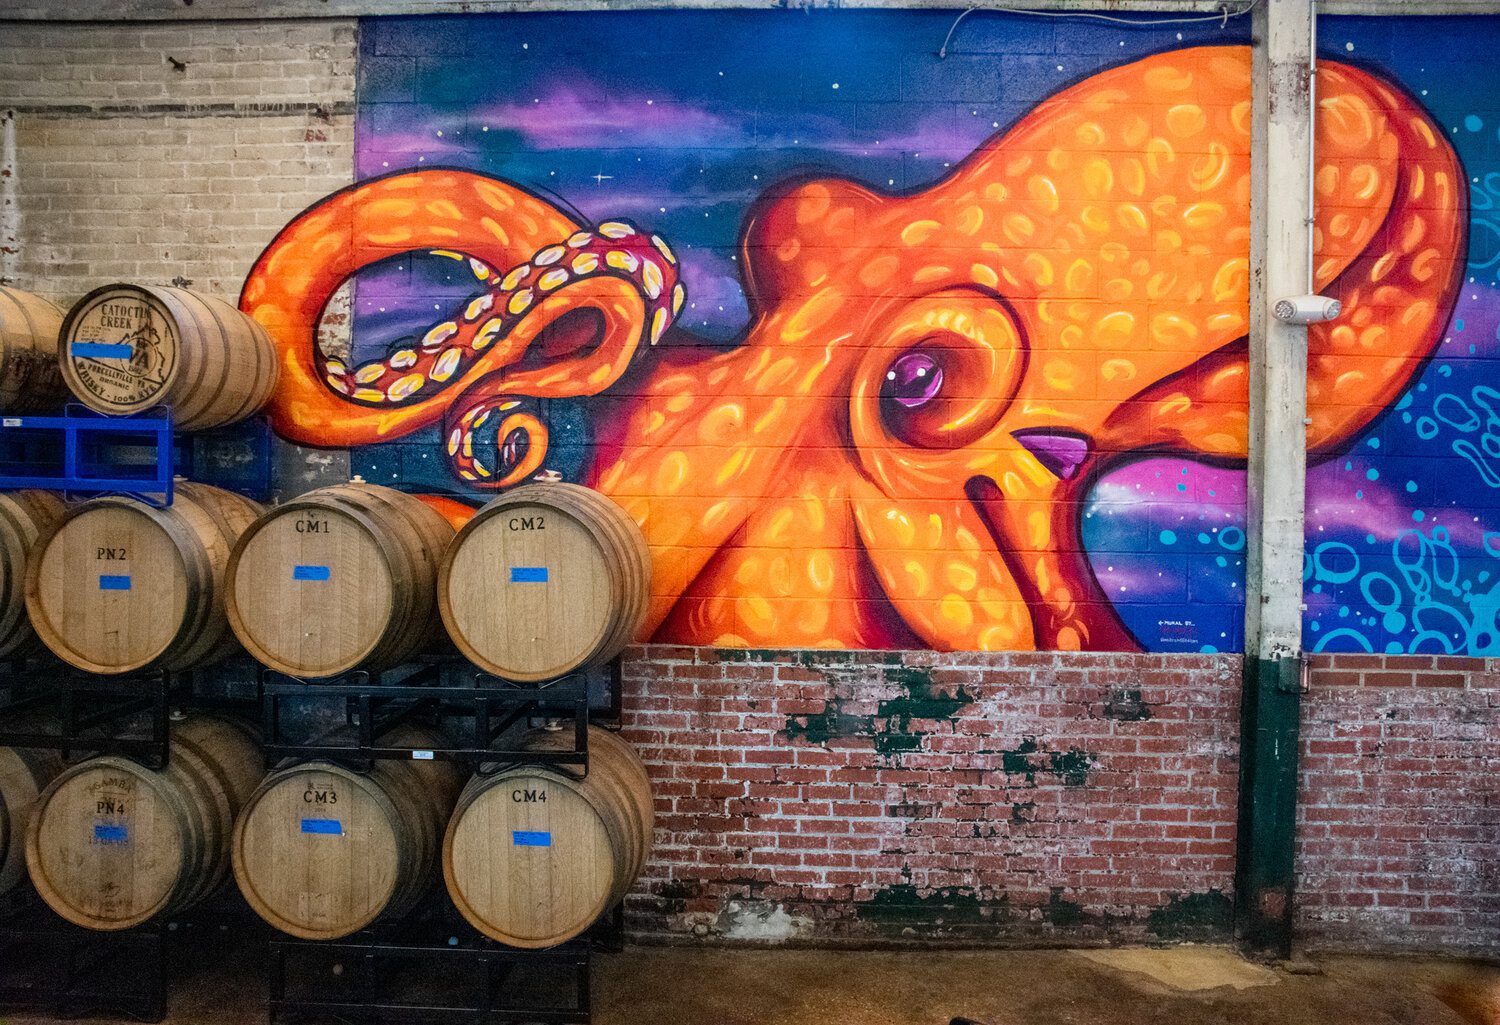 Octopus mural on Mobtown Brewing Company's wall